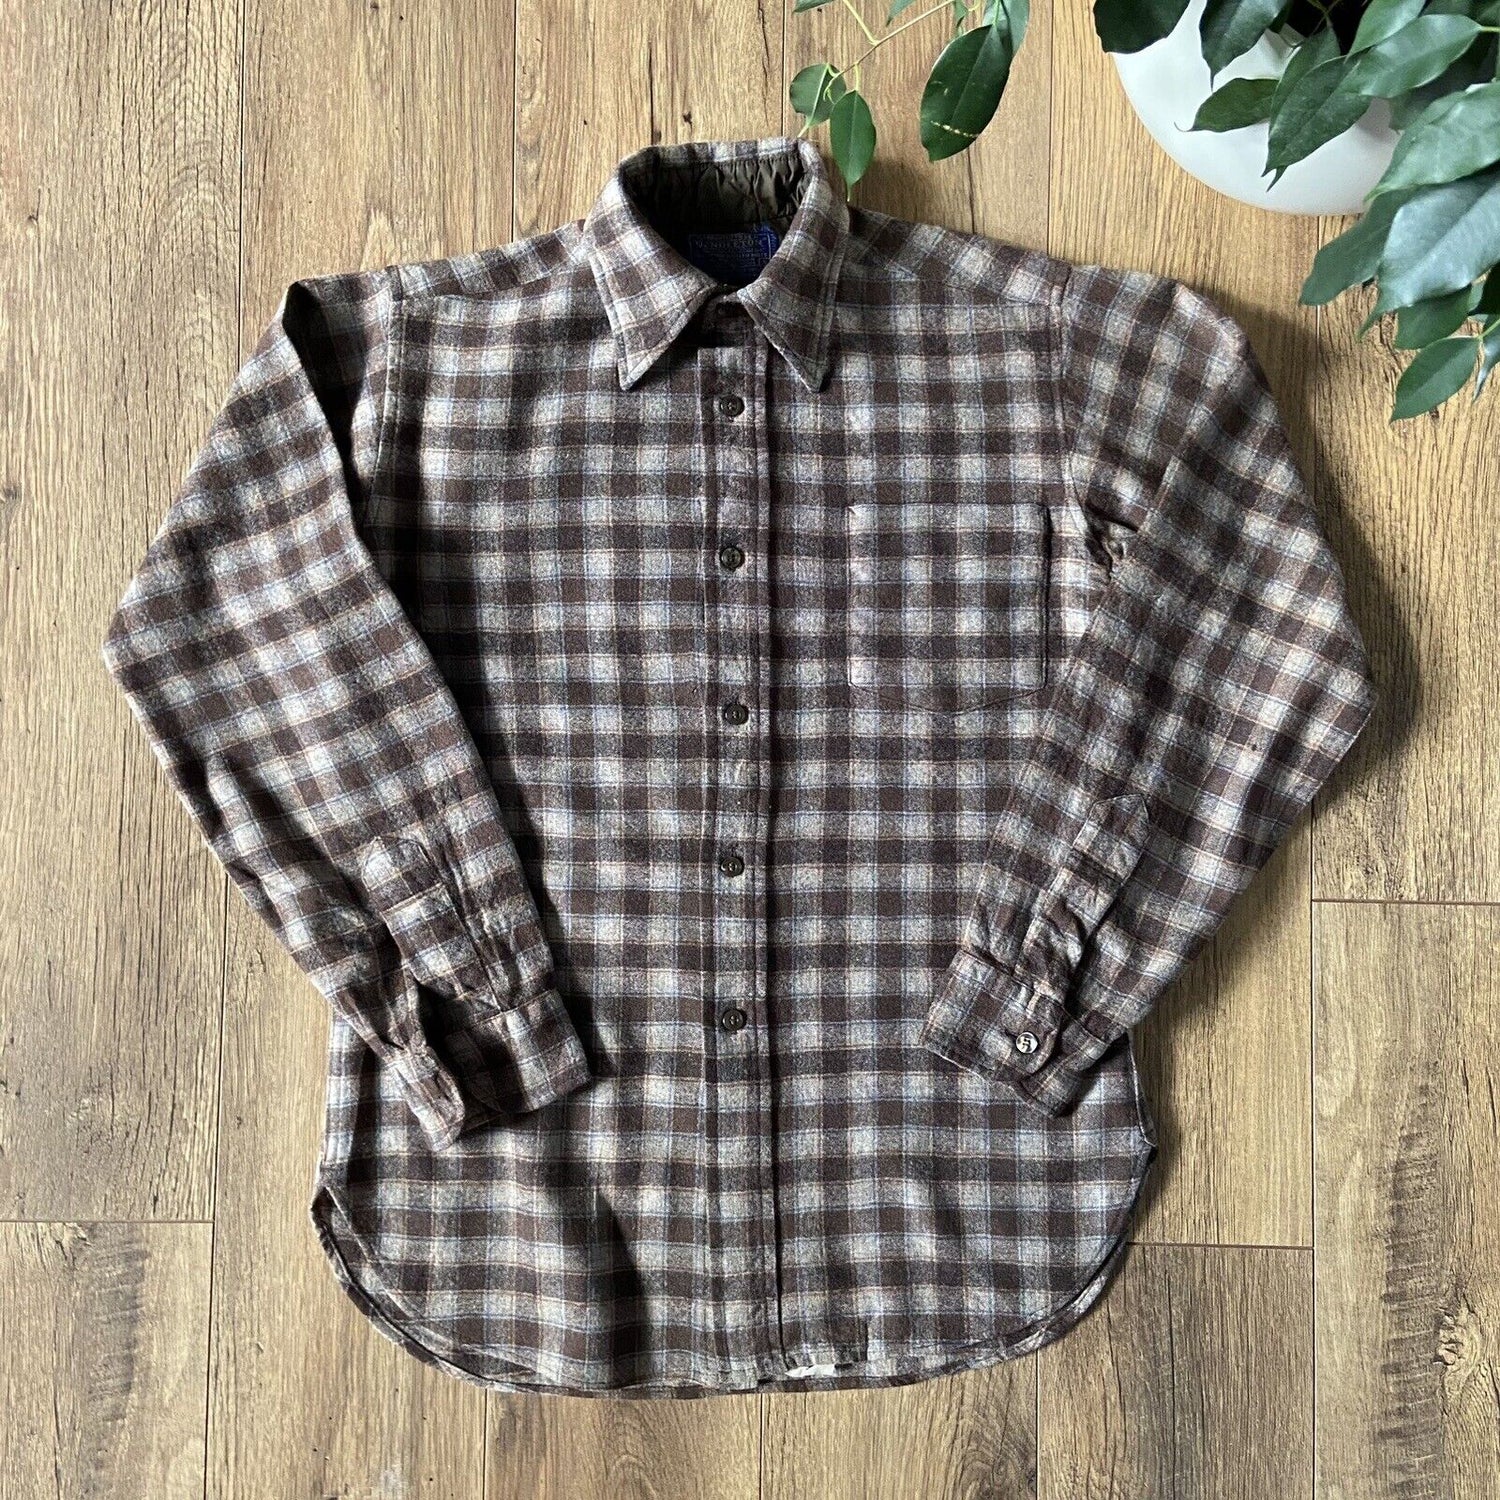 Vintage Pendleton Check Shirt 70s/80s Size S Pure Wool Brown